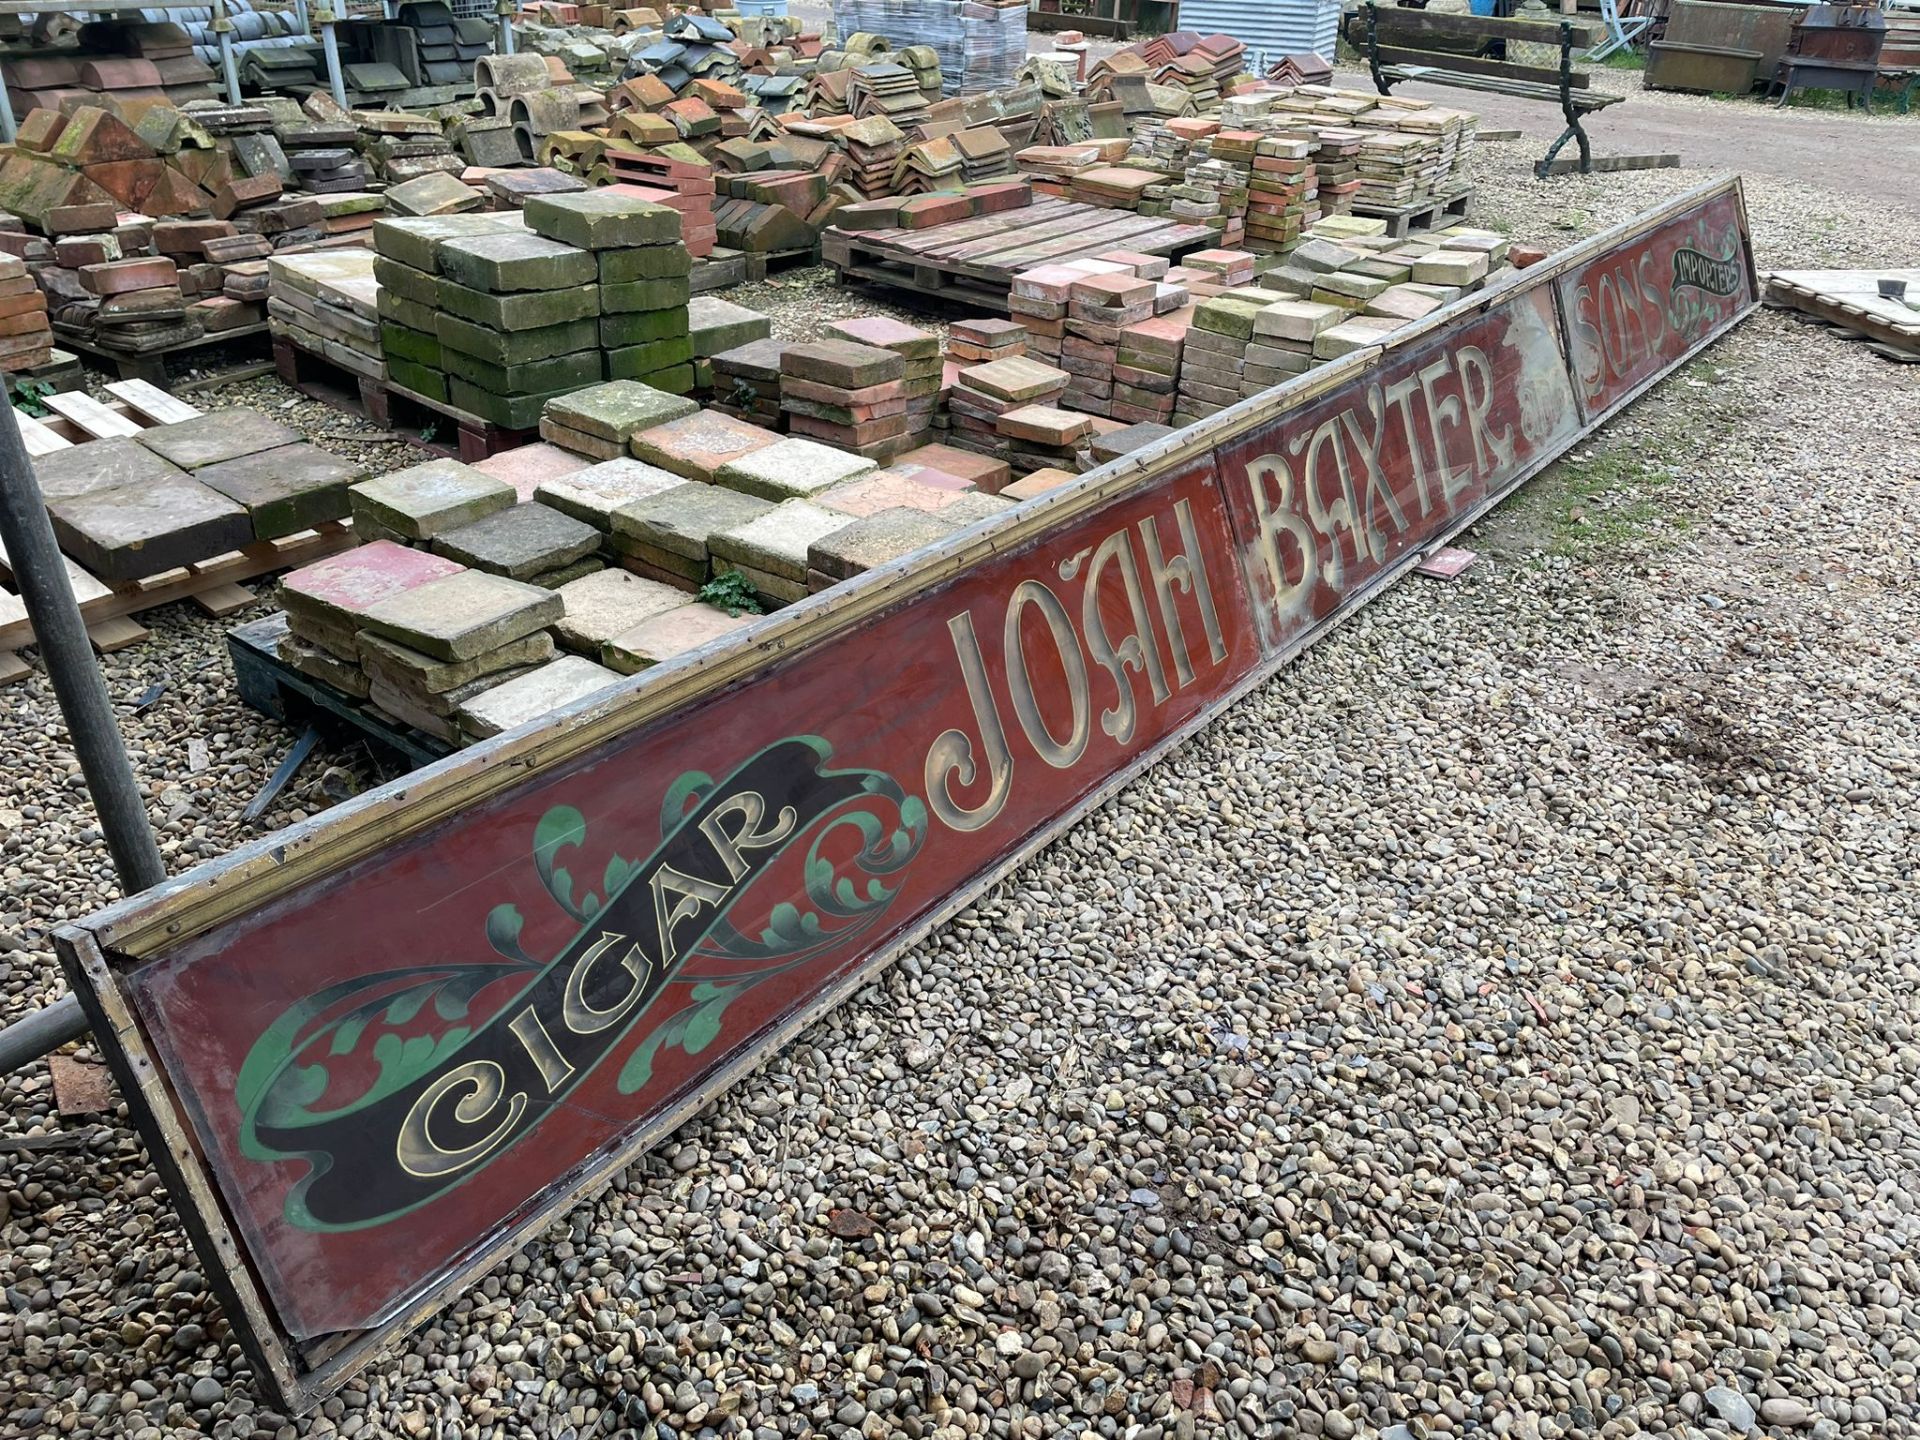 John Baxter's antique sign is a very old ideal